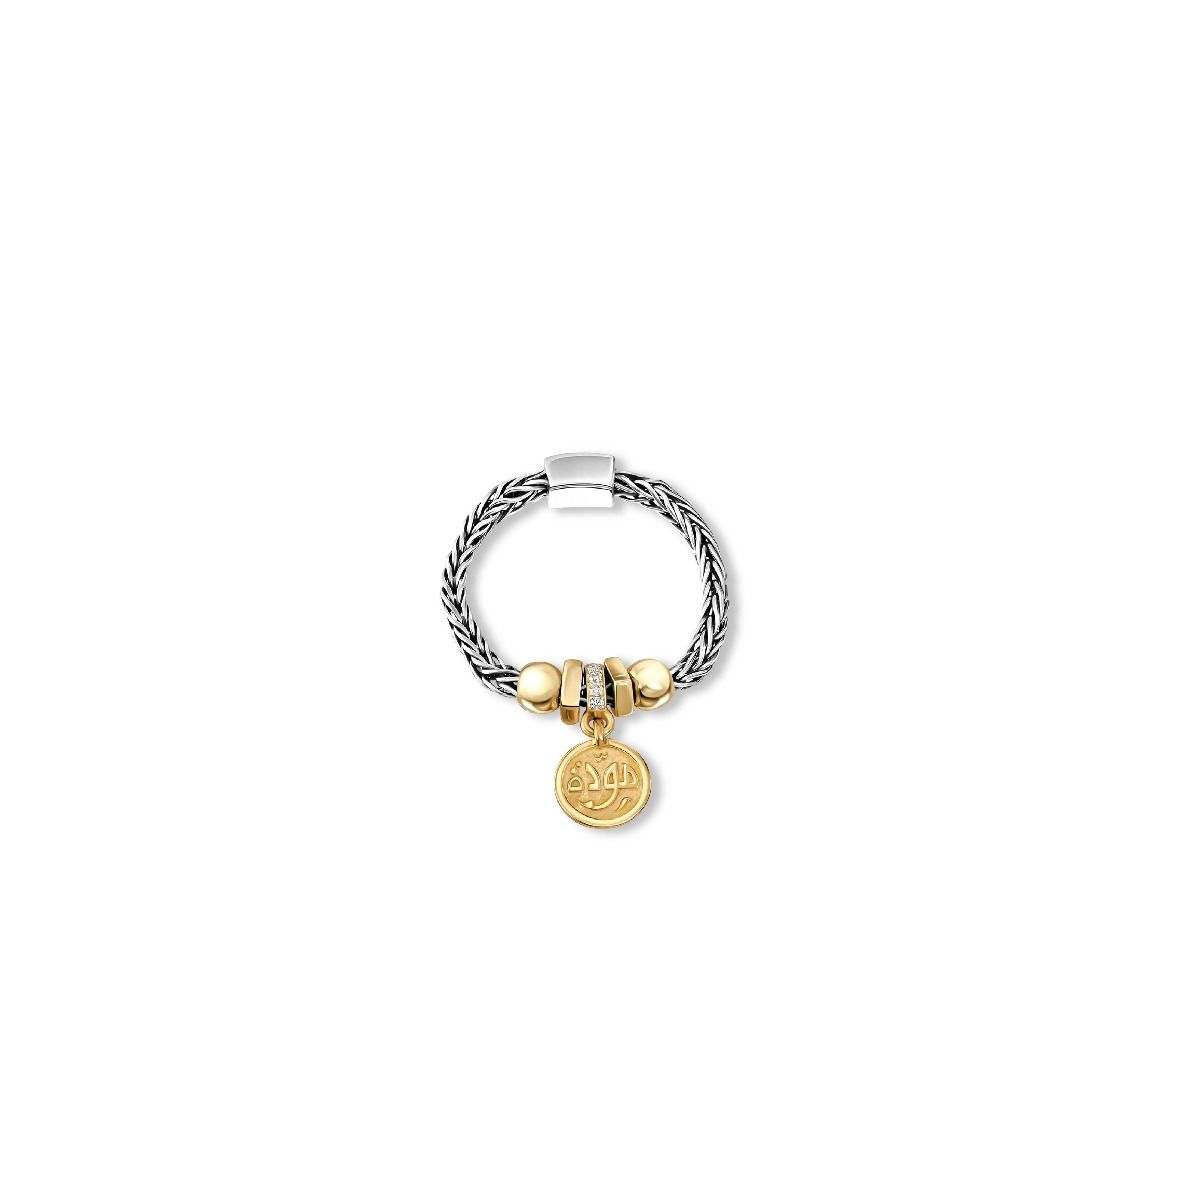 Affection Roman Chain Ring by Azza Fahmy - Designer Rings